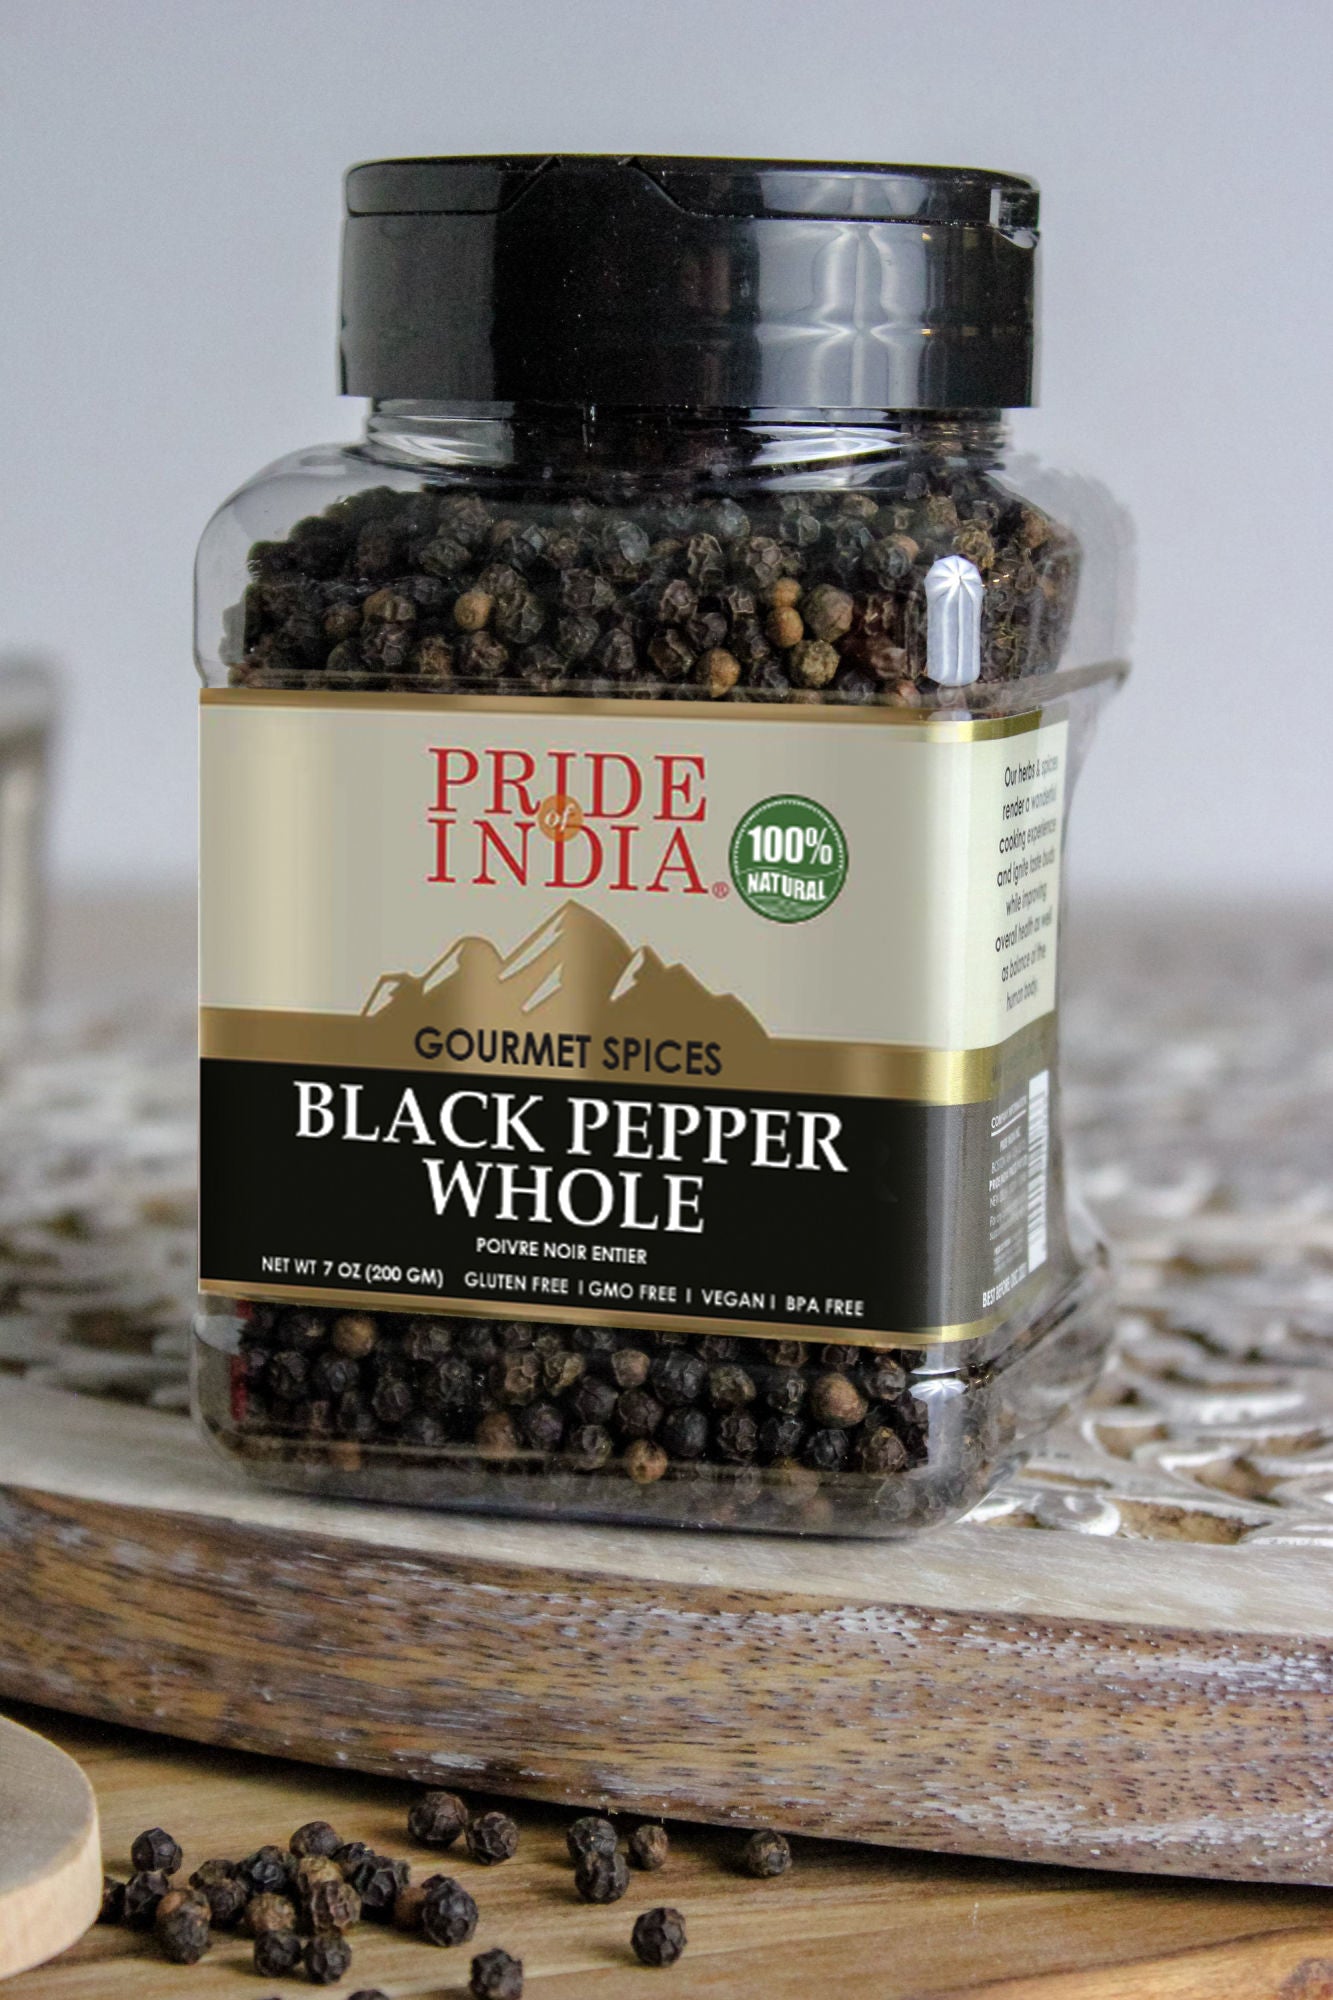 Pride of India – Black Peppercorn Whole – Gourmet & Culinary Spice – Full Bodied, Dried & Flavorful – Preservatives & Gluten Free – 8 oz. Medium Dual Sifter Jar